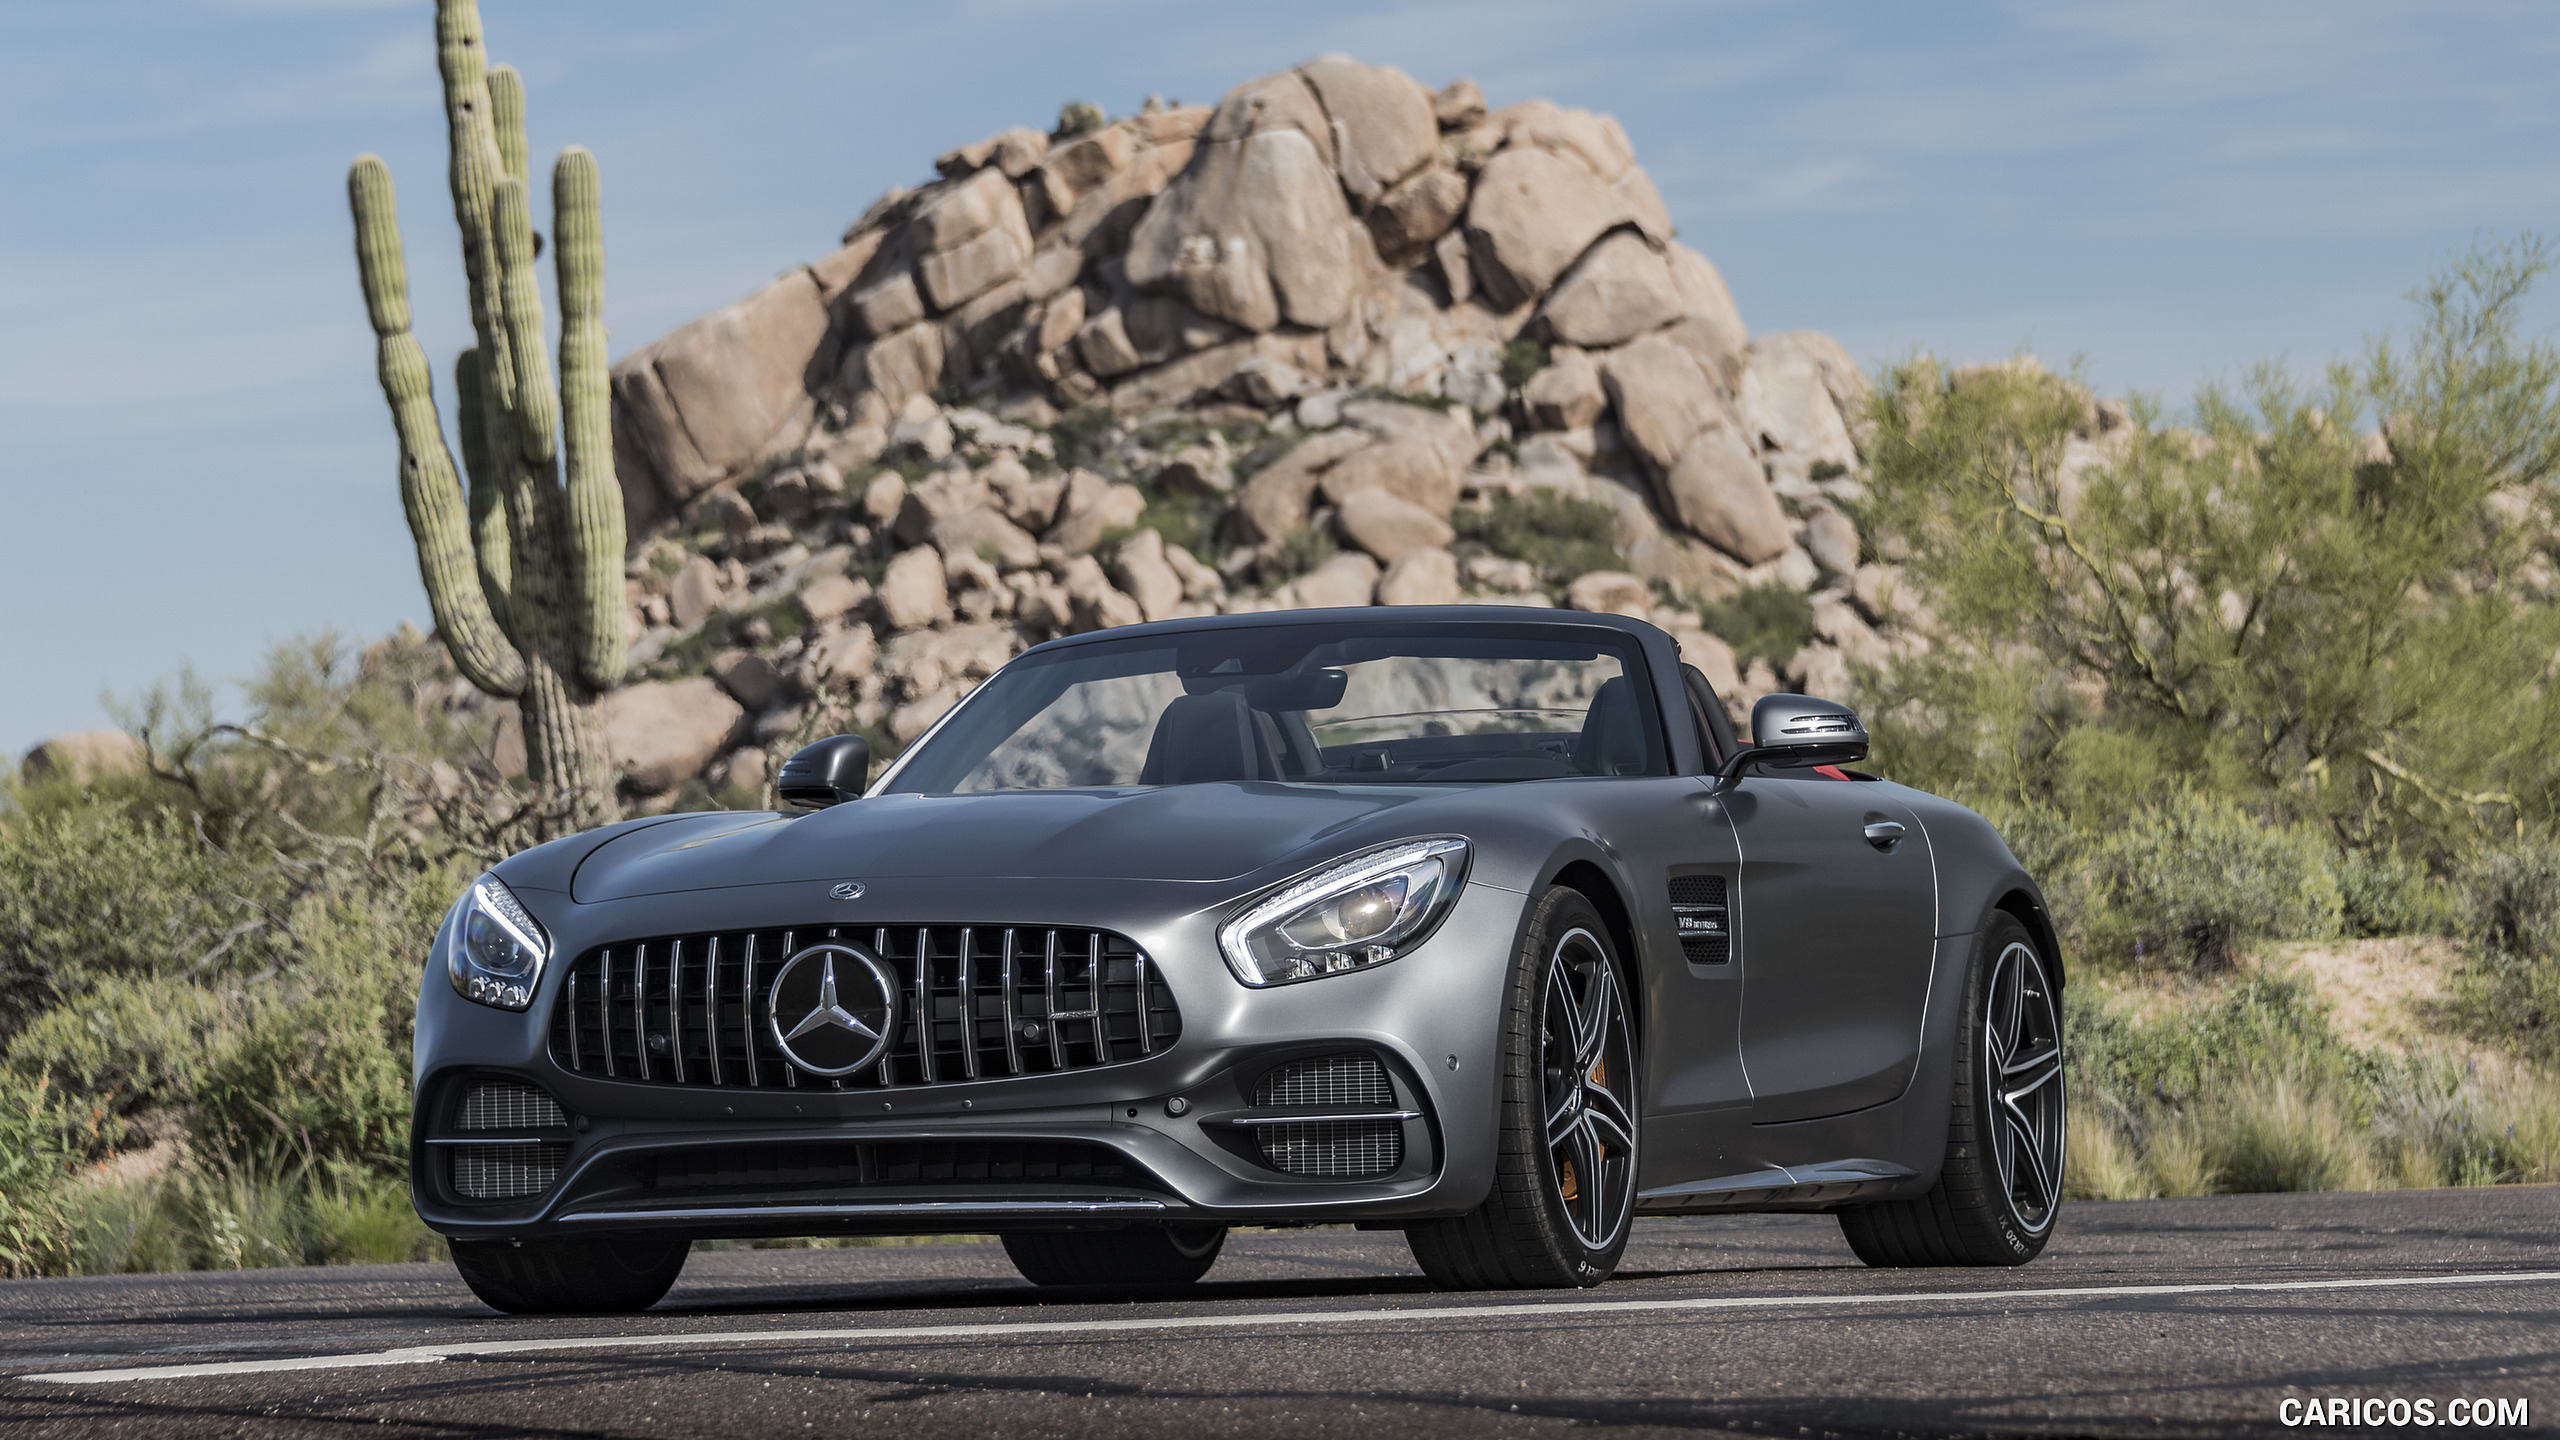 2018 Mercedes-AMG GT C Roadster - Front Three-Quarter, #319 of 350